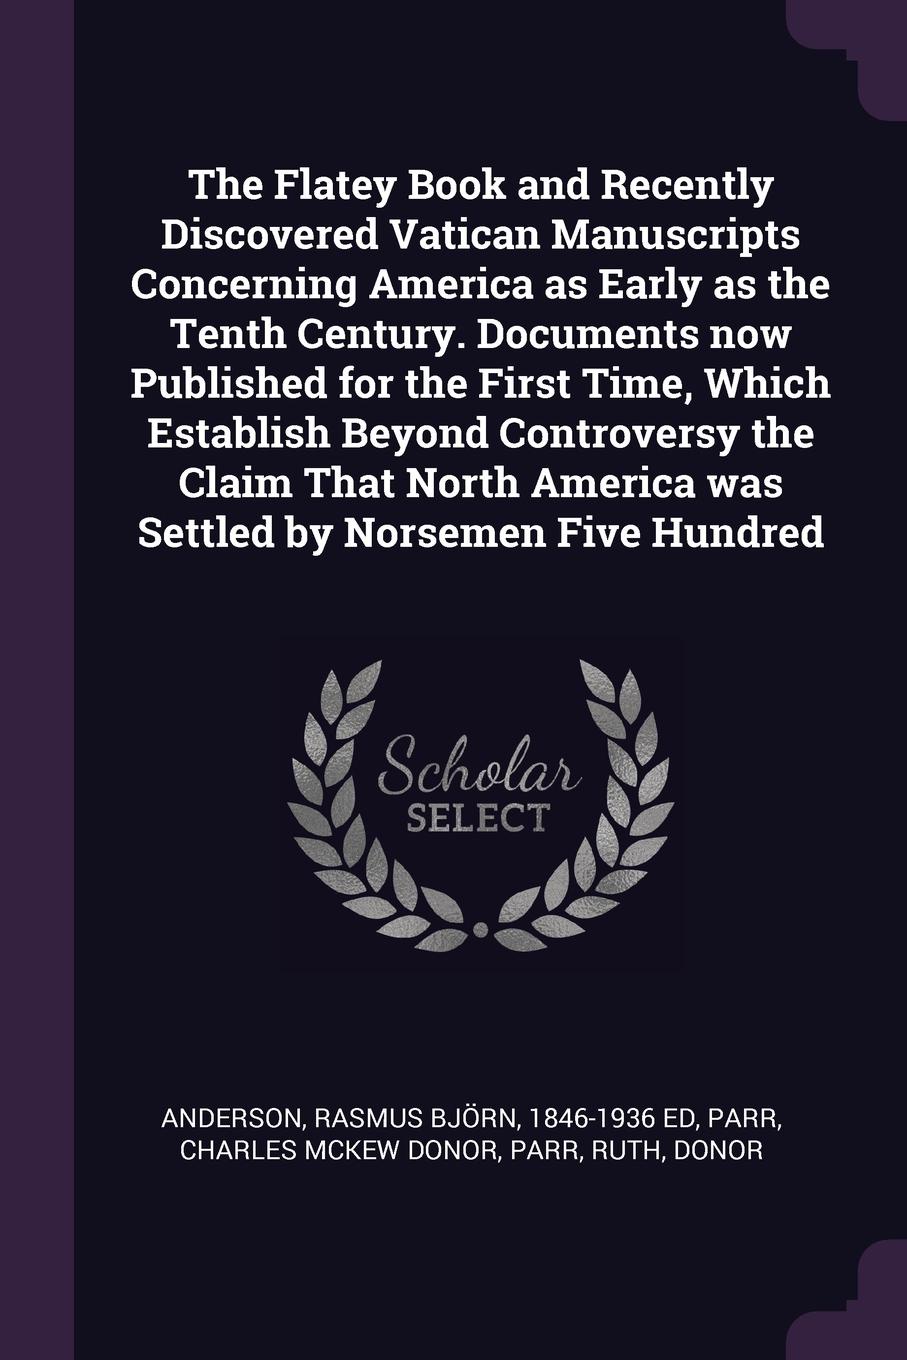 The Flatey Book and Recently Discovered Vatican Manuscripts Concerning America as Early as the Tenth Century. Documents now Published for the First Time, Which Establish Beyond Controversy the Claim That North America was Settled by Norsemen Five ...